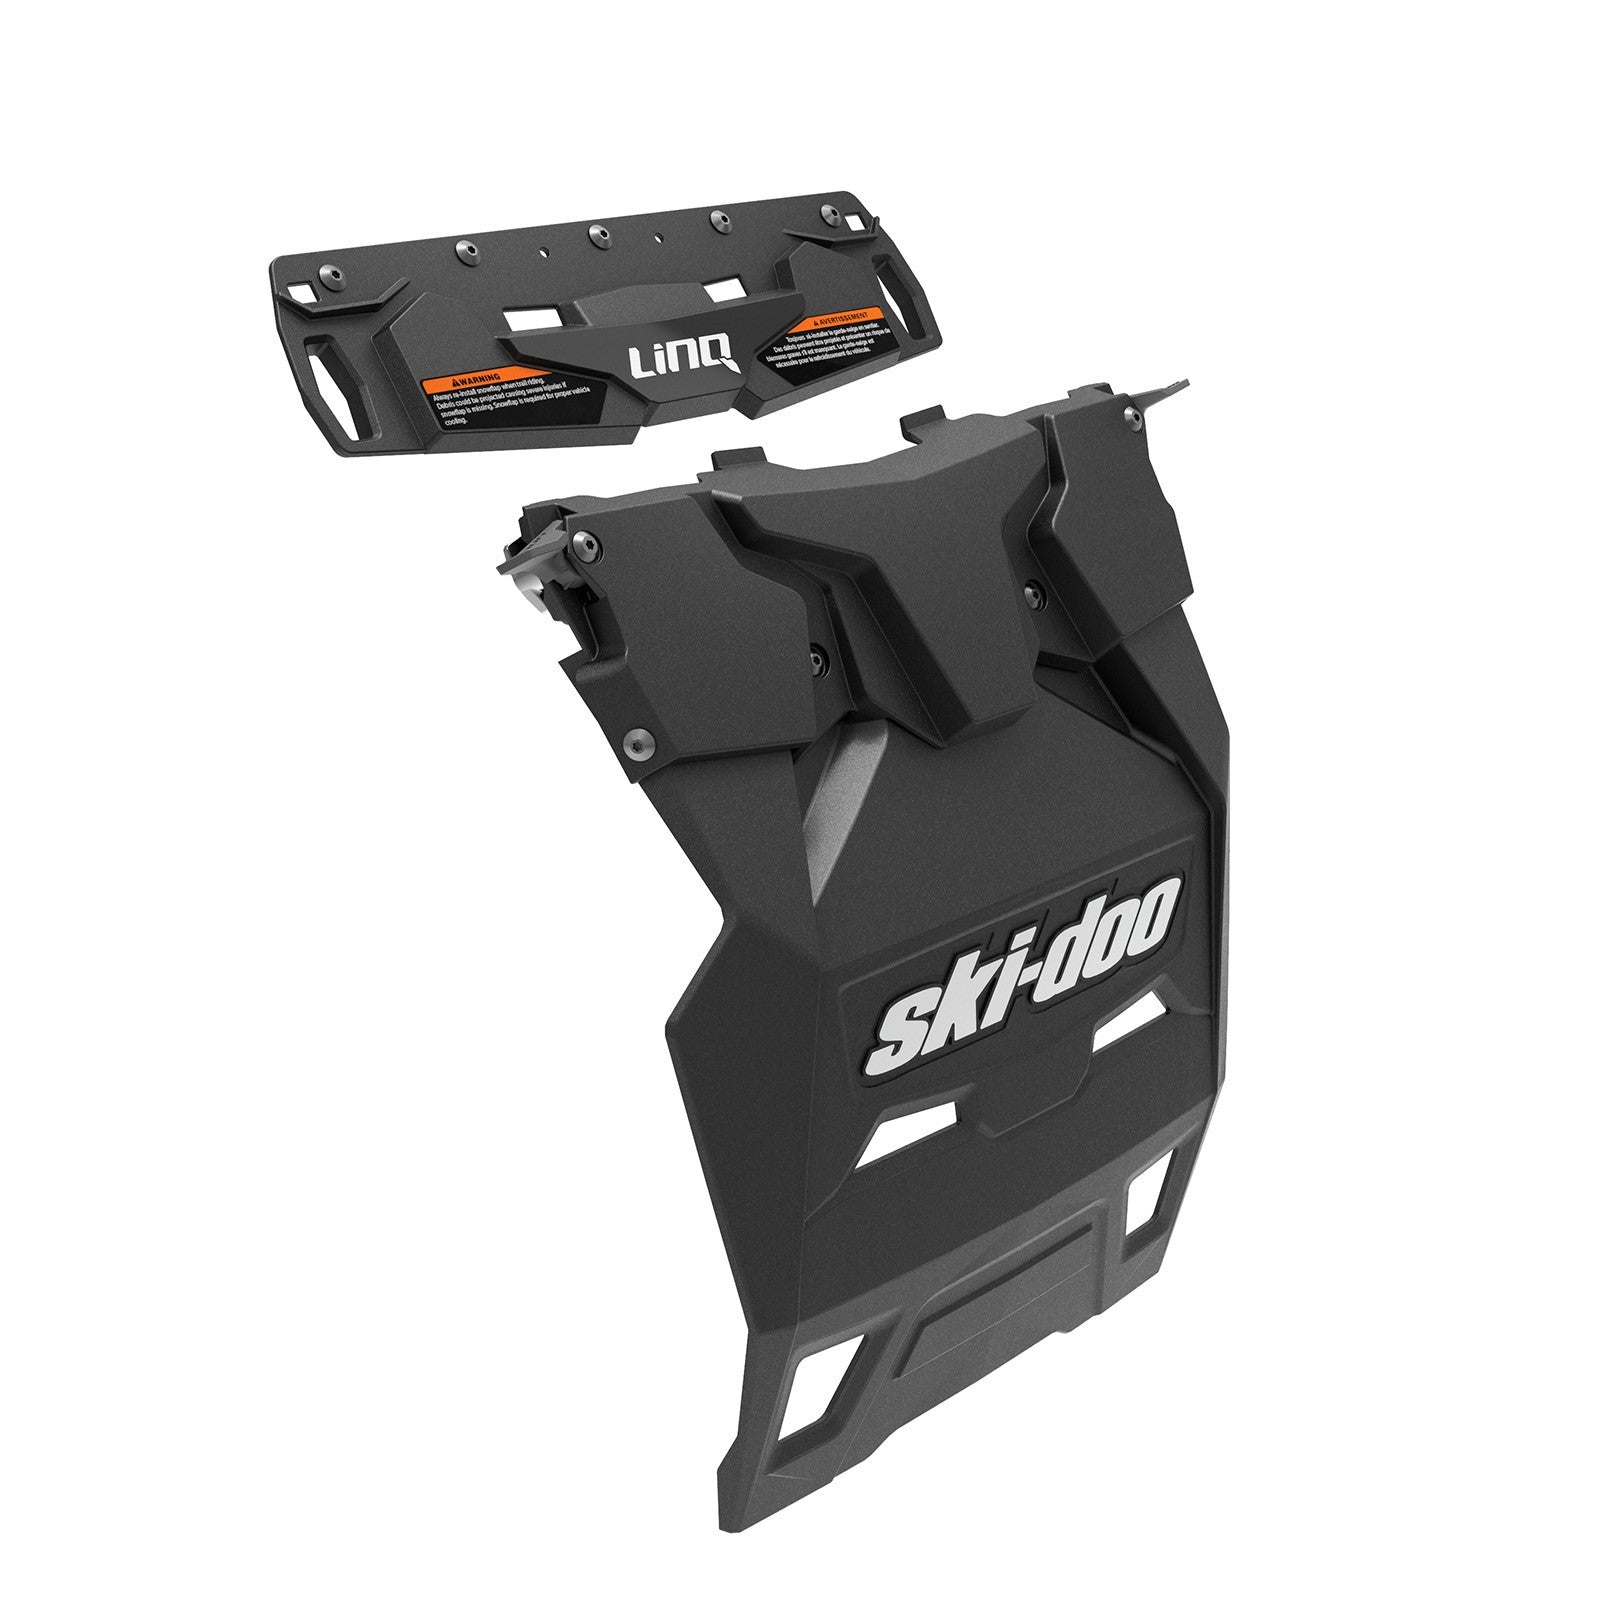 Ski-Doo LinQ Removable Snowflap (REV Gen4 Summit, Freeride and Backcountry 146" and up)